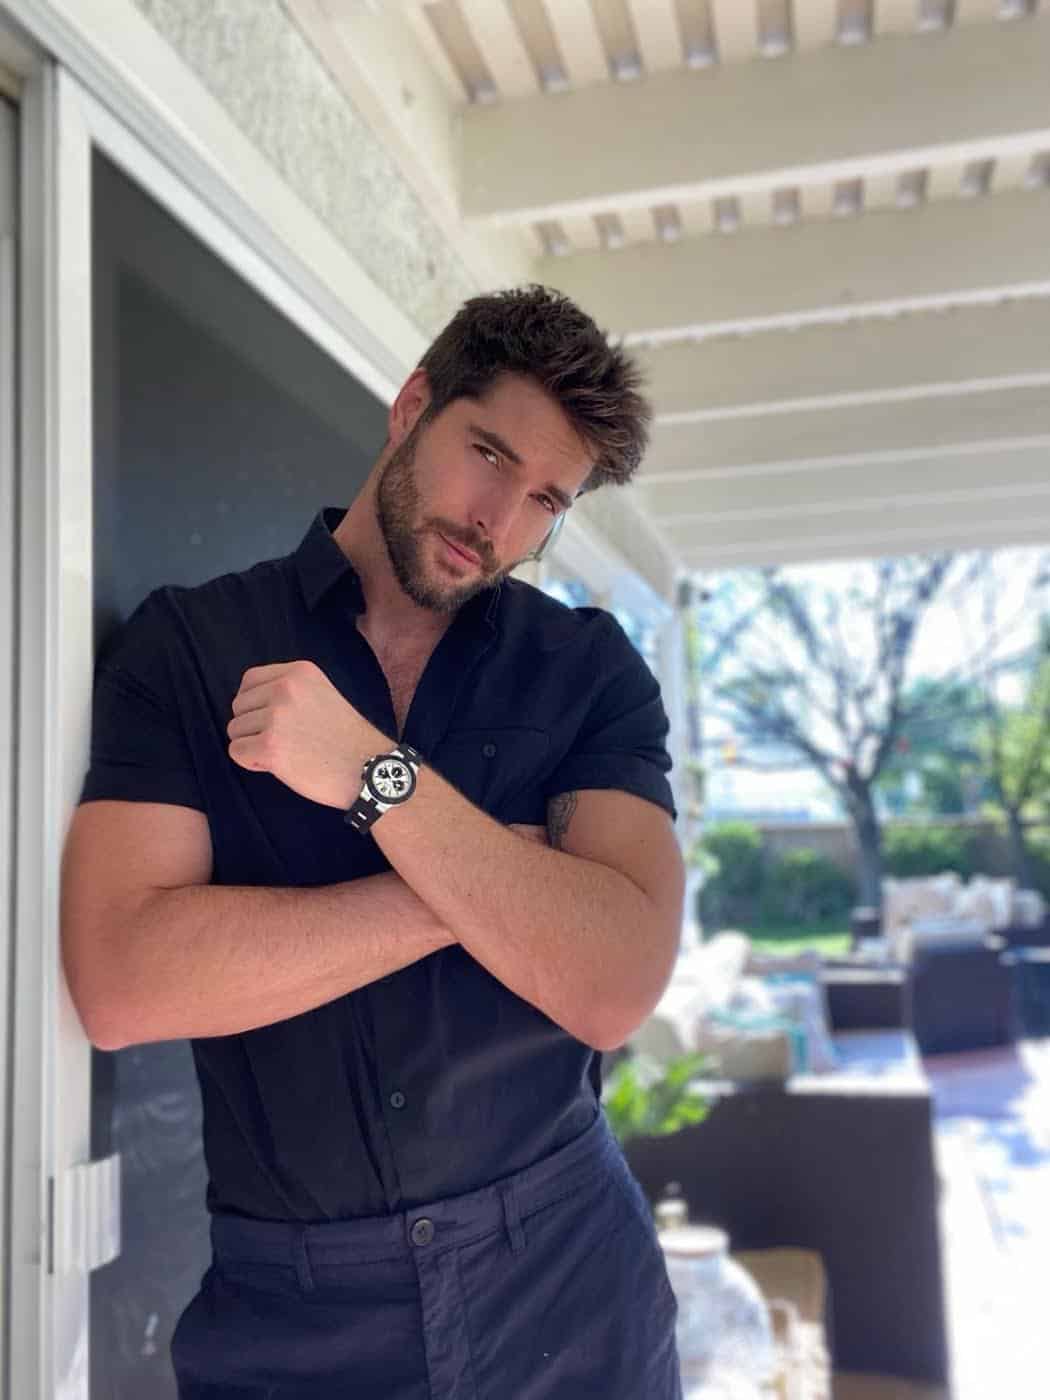 Who The Hell Is Nick Bateman Now?